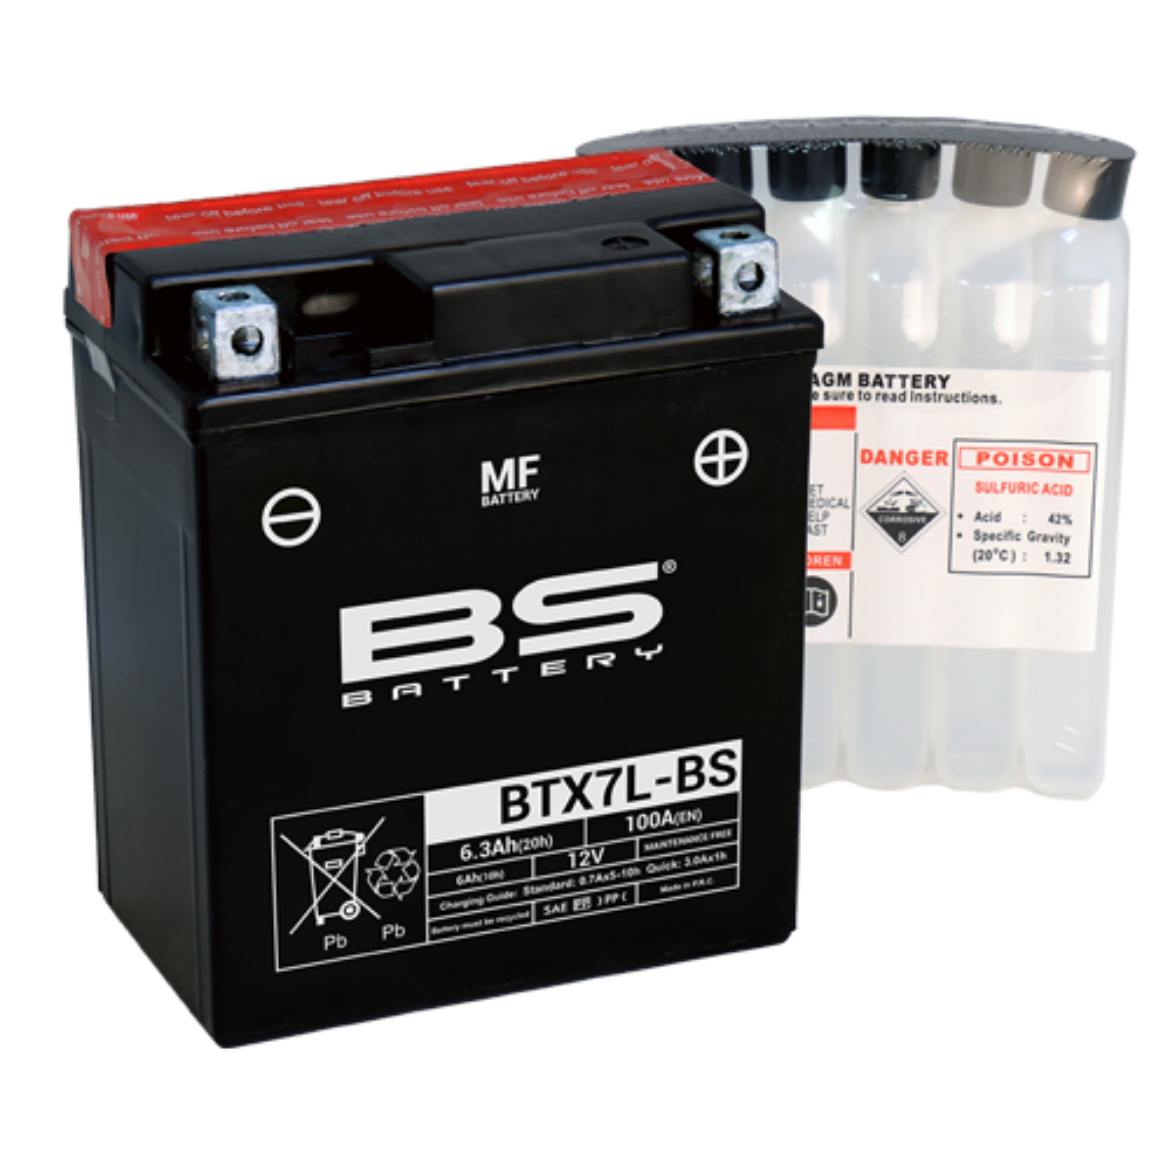 Picture of BTX7L-BS 12V 6AH 100CCA MAINTENANCE FREE BS MOTORCYCLE BATTERY